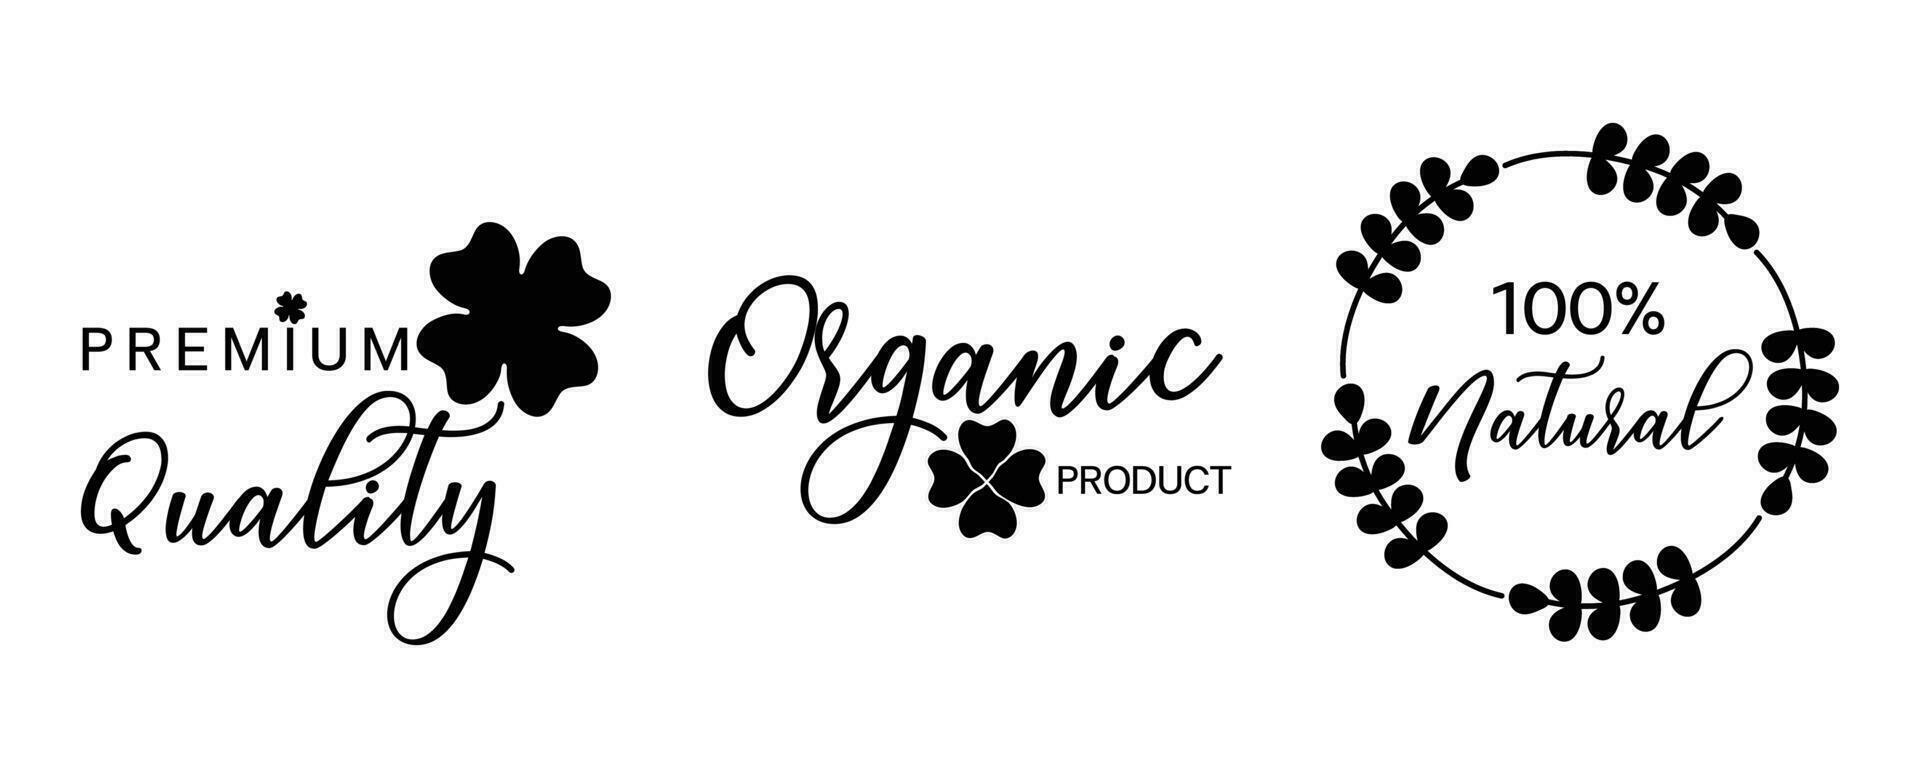 Organic food, natural product, healthy life and farm fresh for food and drink promotion. vector